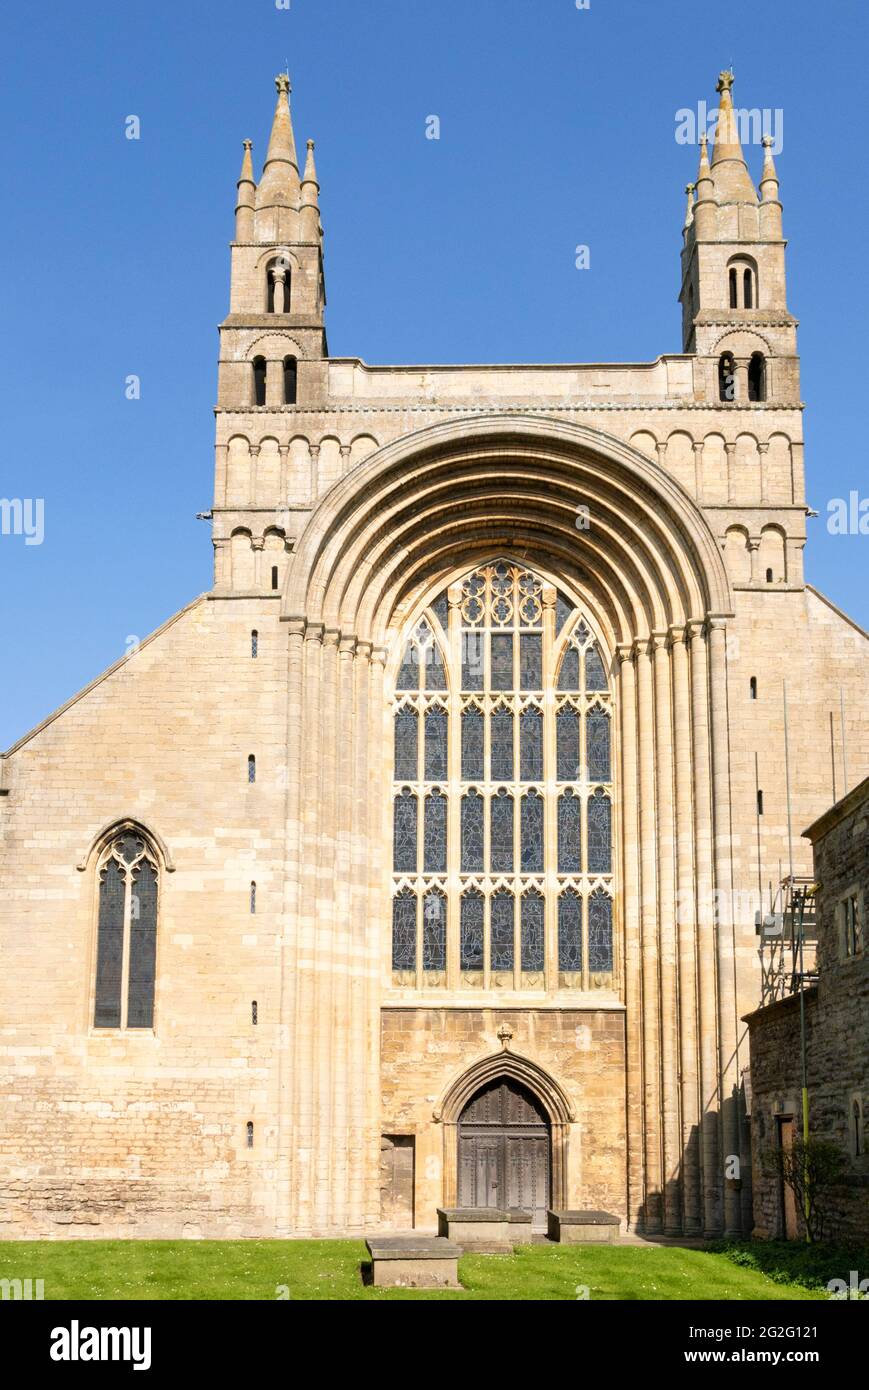 Tewkesbury Abbey Tewkesbury ,Abbey Church of St Mary the Virgin The West Facade and tall Norman Tower Tewkesbury, Gloucestershire, England, UK, GB Stock Photo